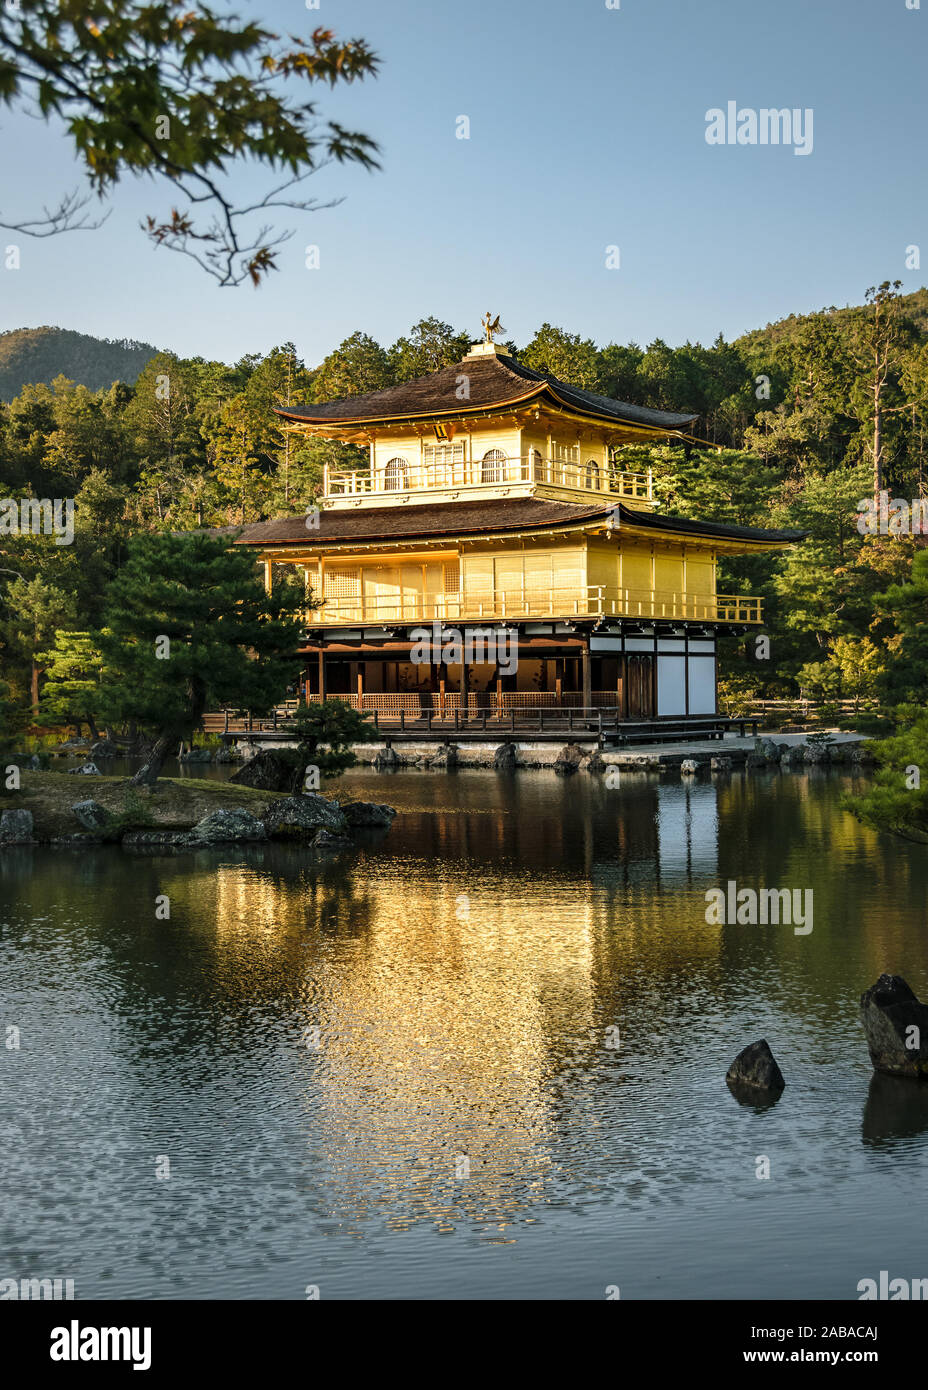 Temple of the Golden Pavilion (Kinkaku-ji). The building is one of 17 locations making up the Historic Monuments of Ancient Kyoto which are World Heri Stock Photo